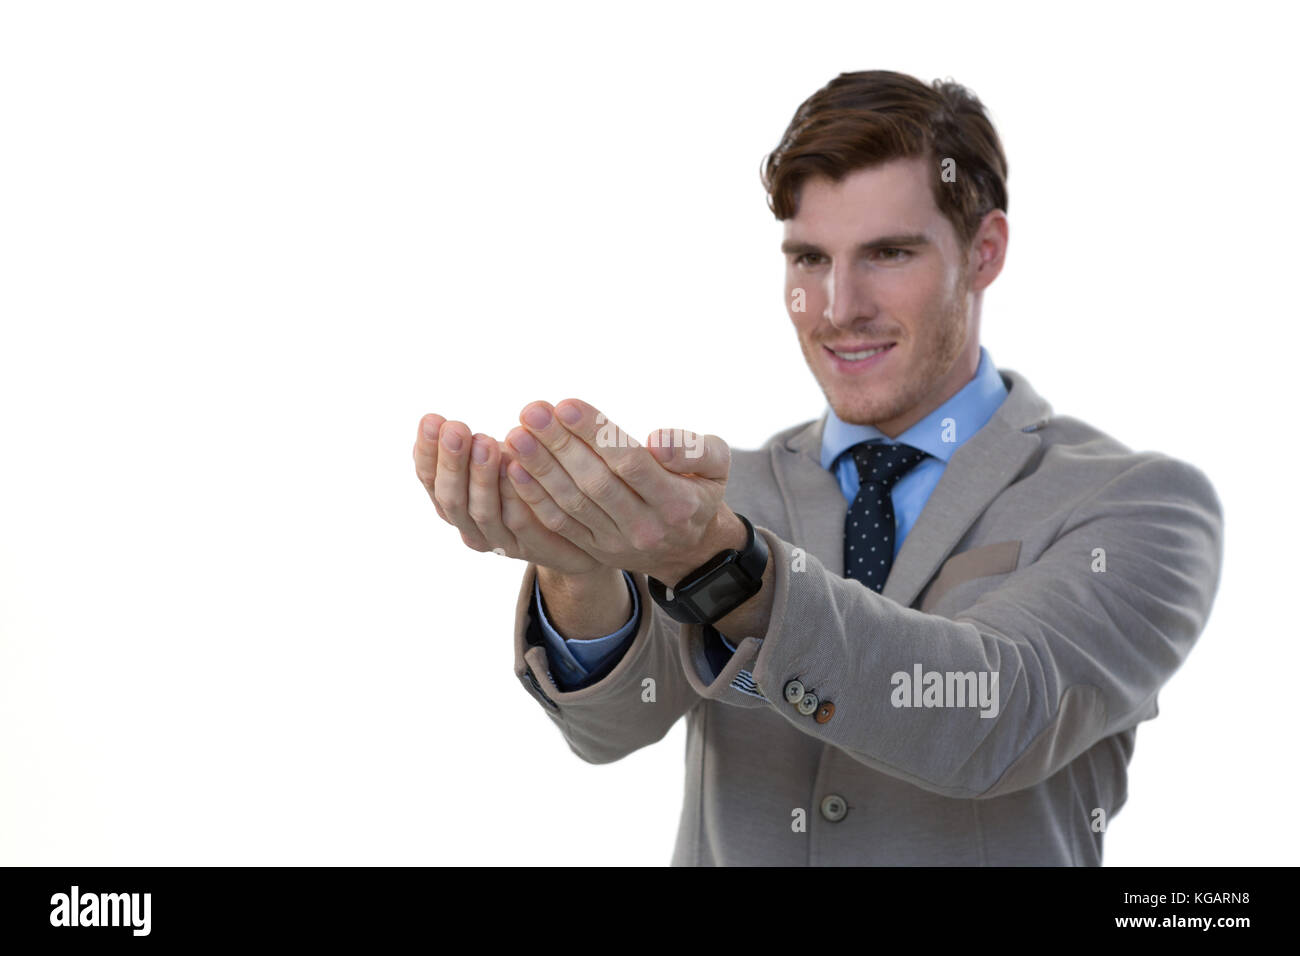 Businessman pretending to hold an invisible object against white background Stock Photo